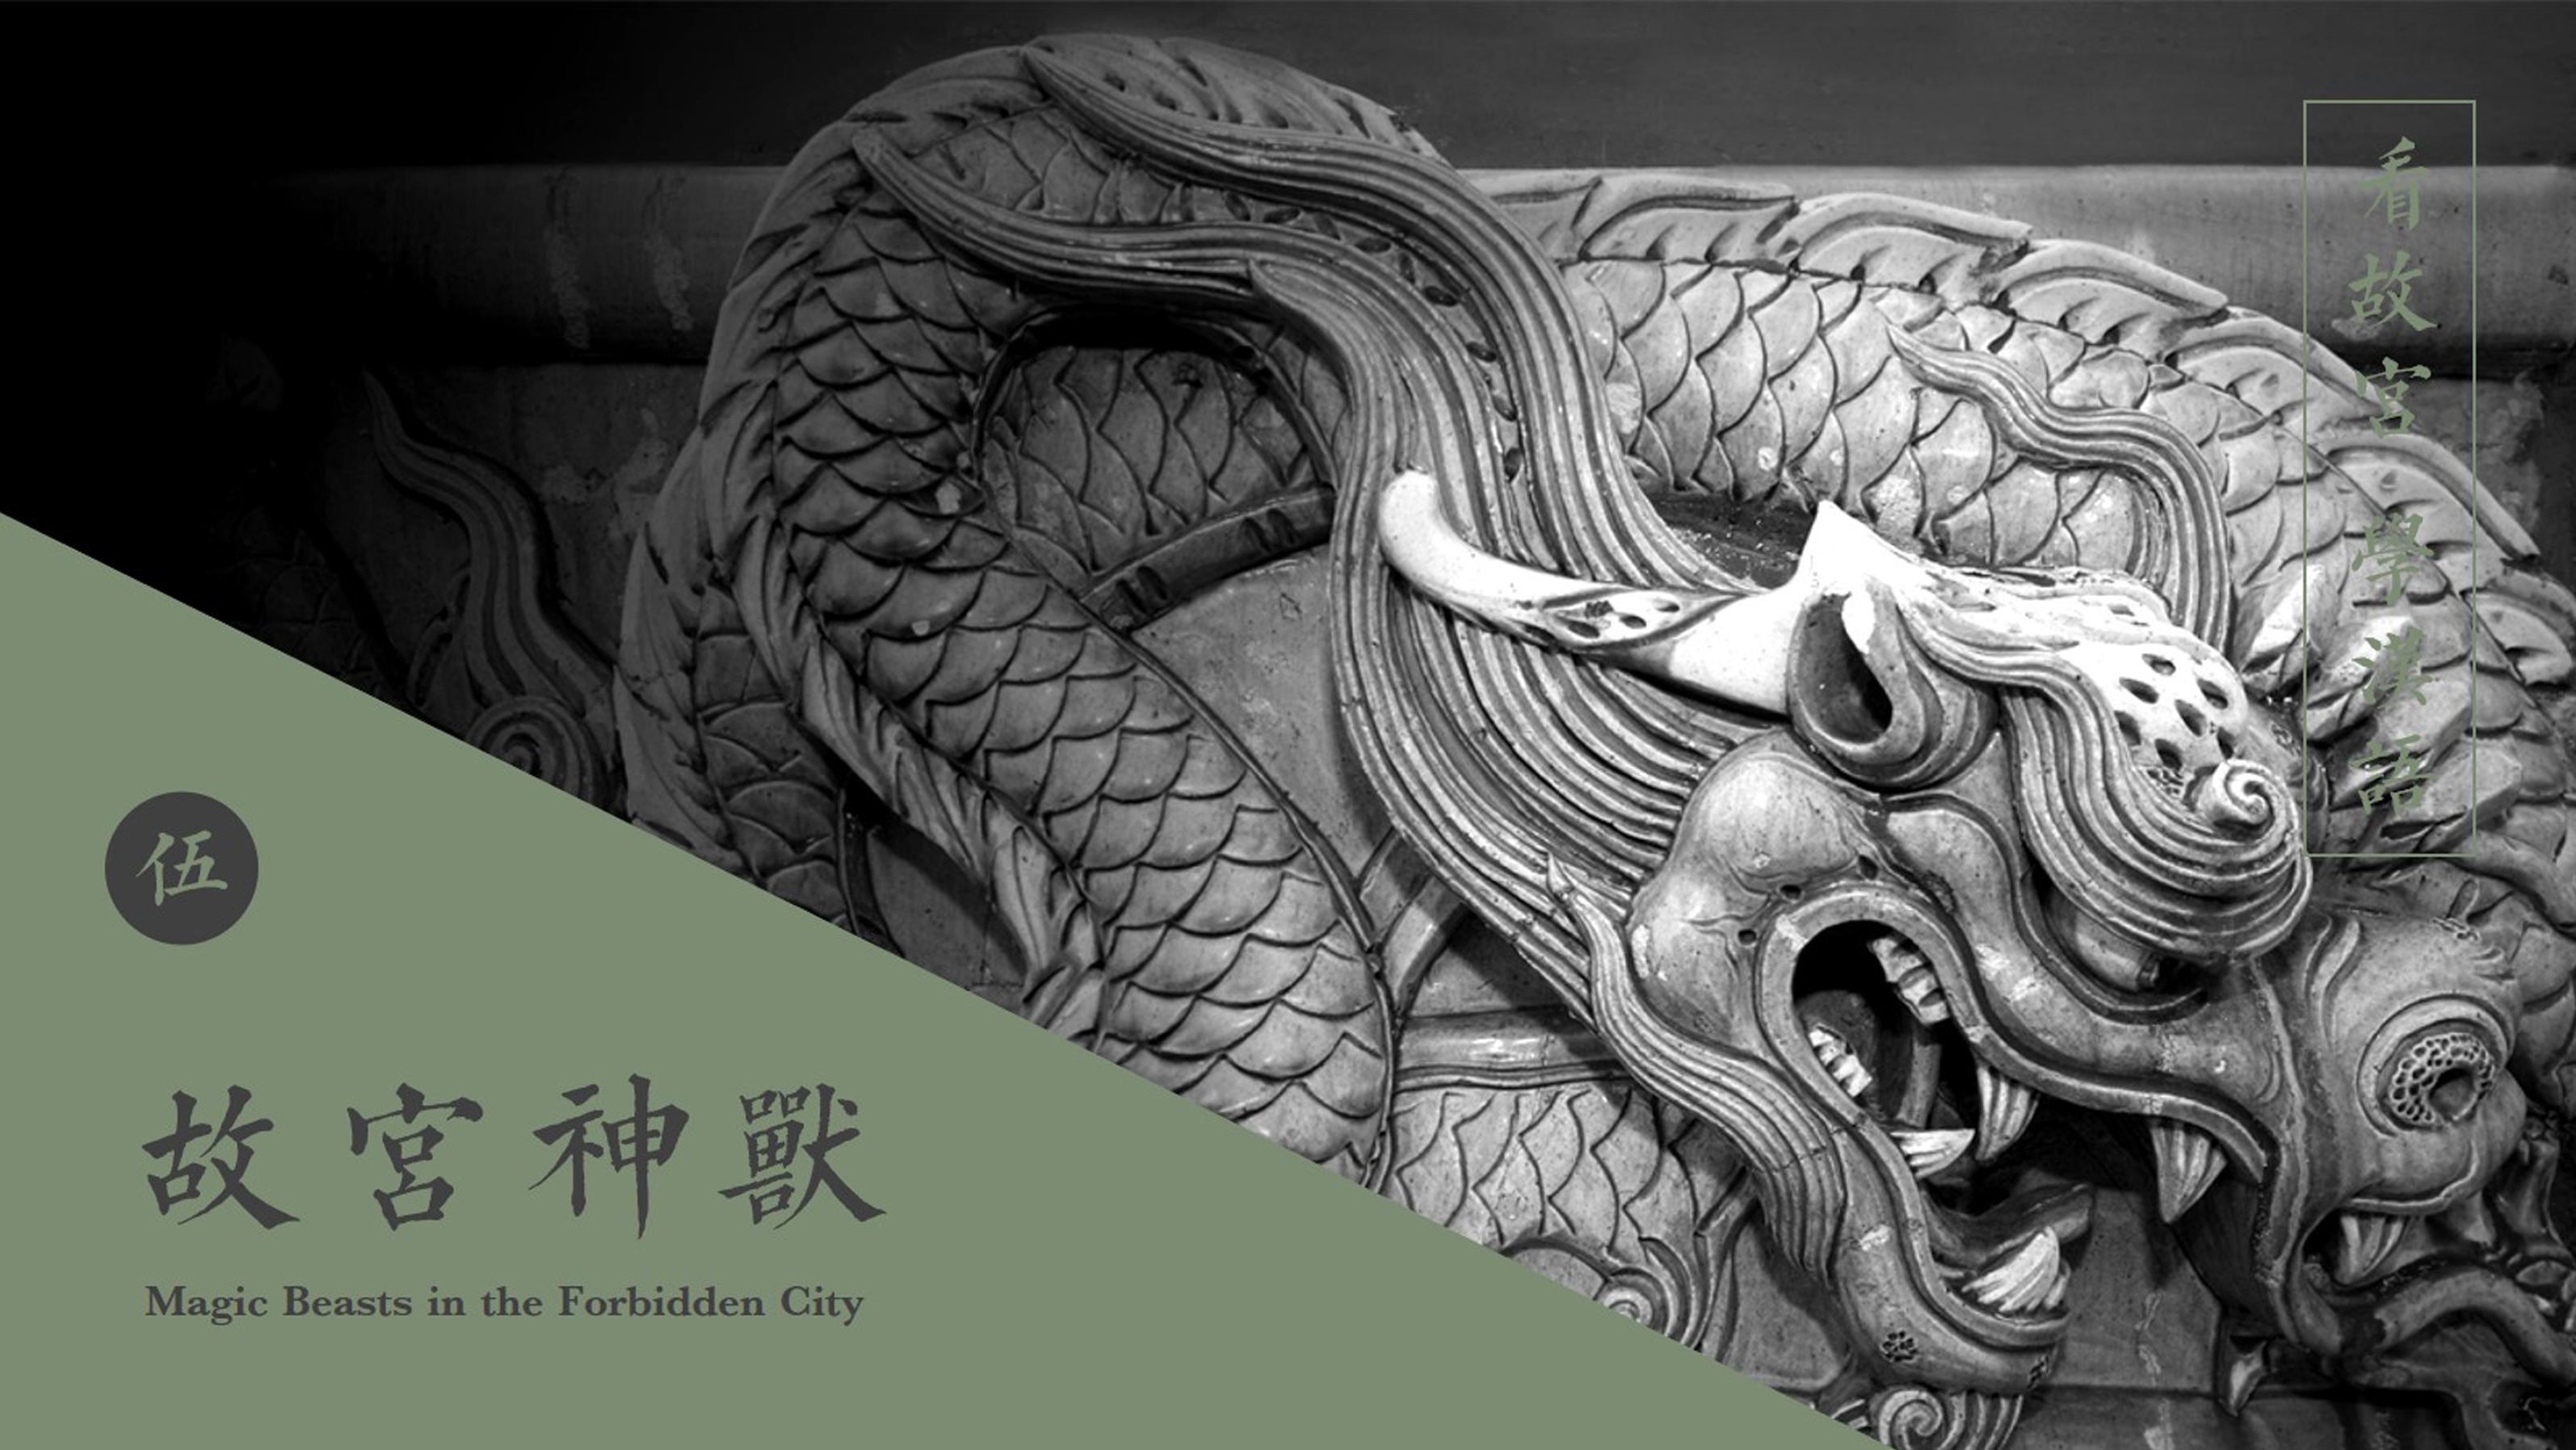 Lecture 5 “The Magical Beasts of the Forbidden City”